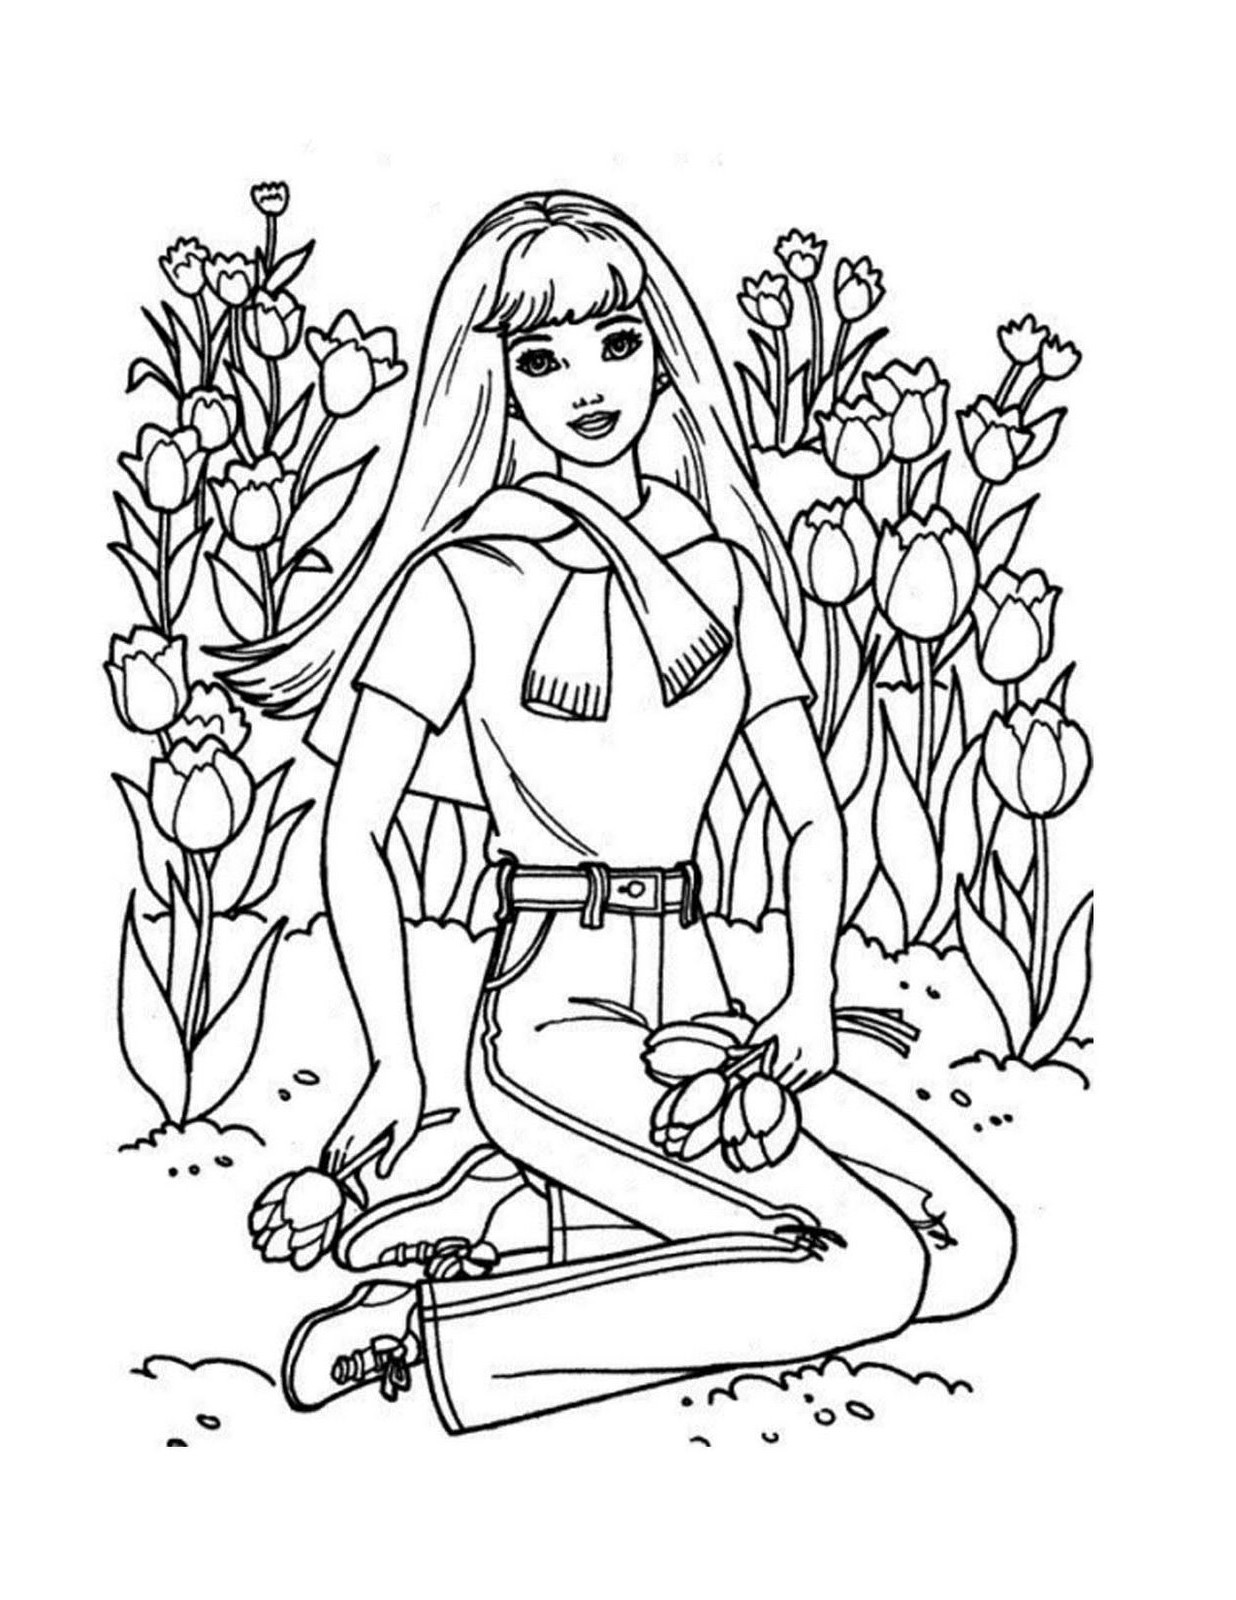 Download 21 Best Ideas Printable Barbie Coloring Pages - Home ...